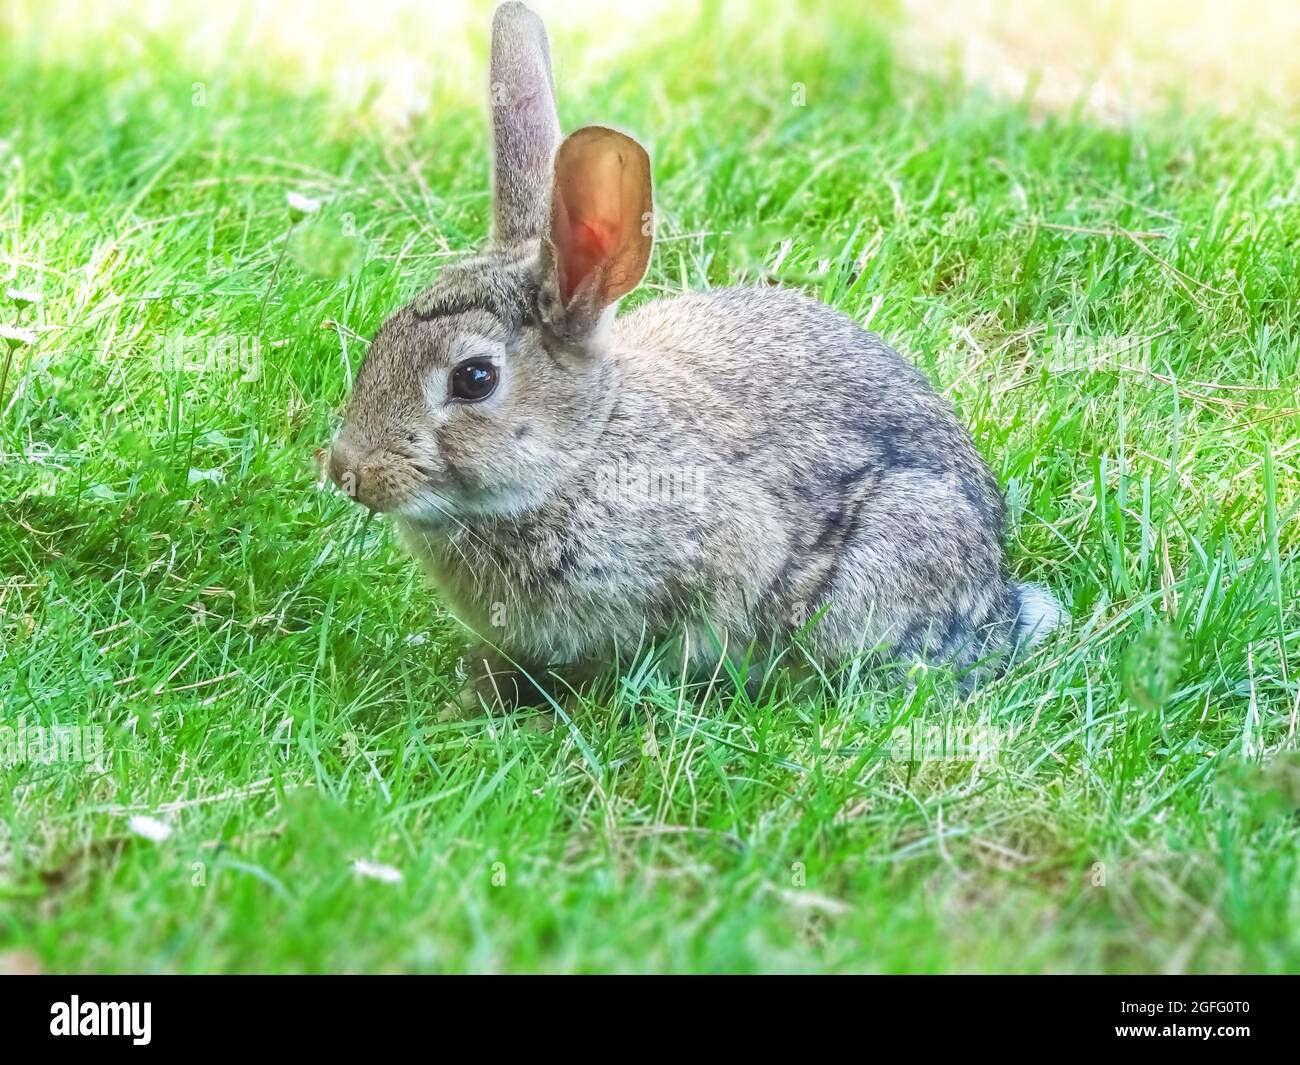 Rabbit Posing For Photo In A Green Field Stock Photo Alamy